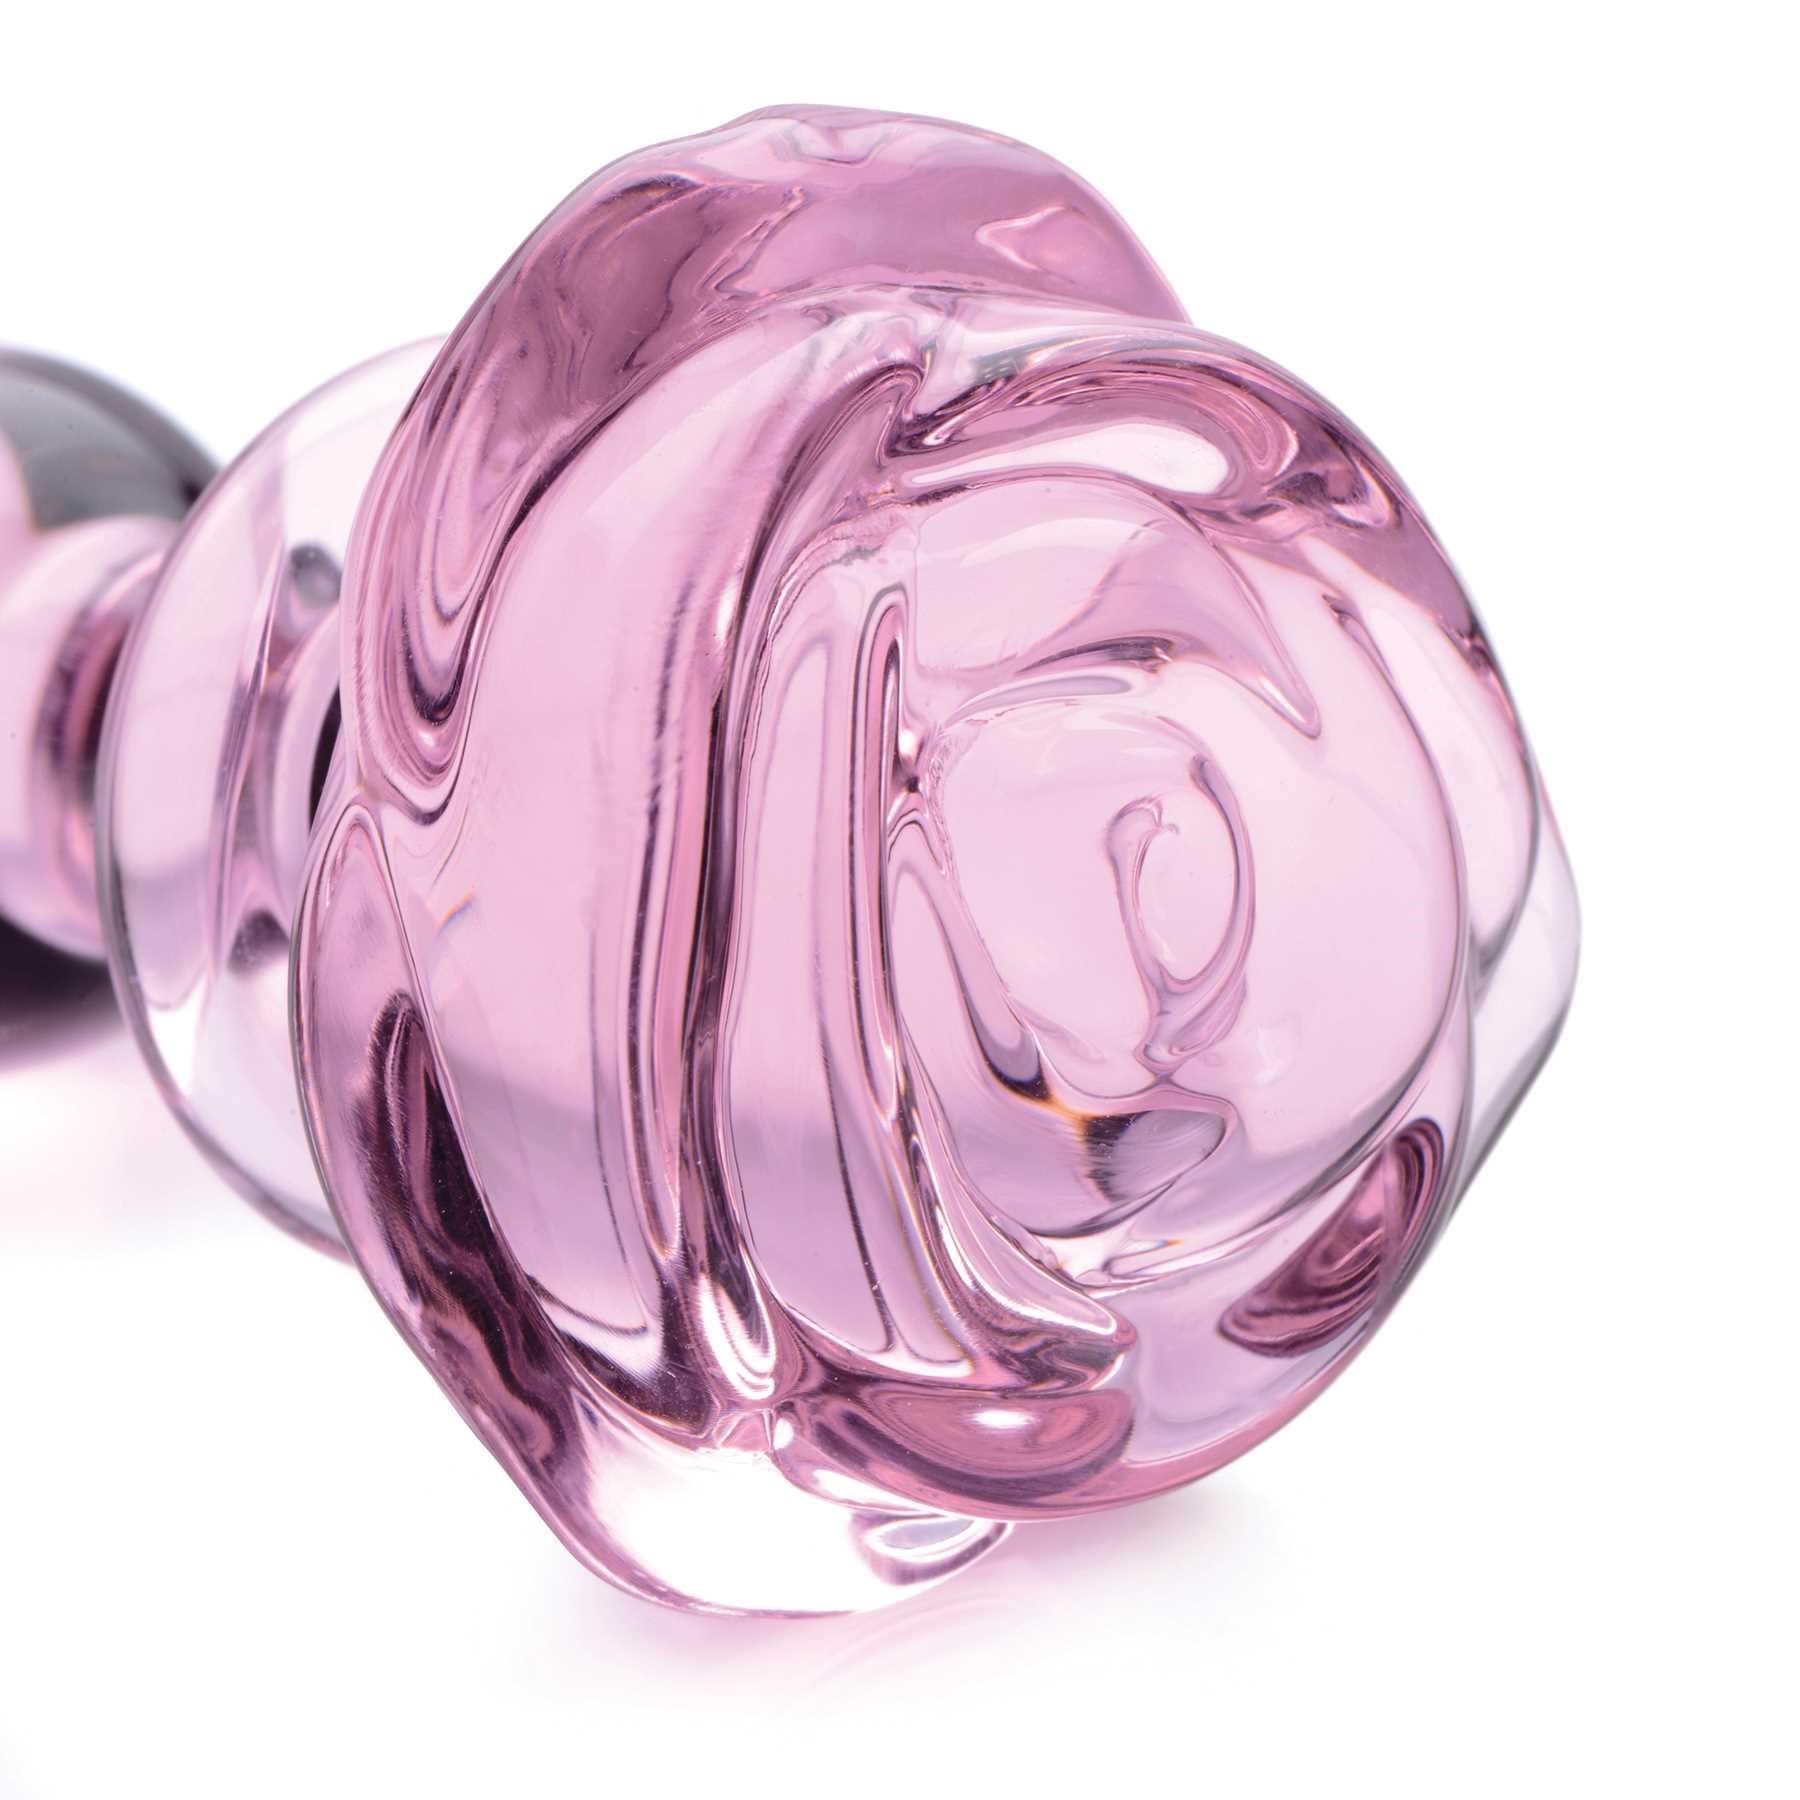 Booty Sparks Pink Rose Glass Anal Plug angled view of rose tip